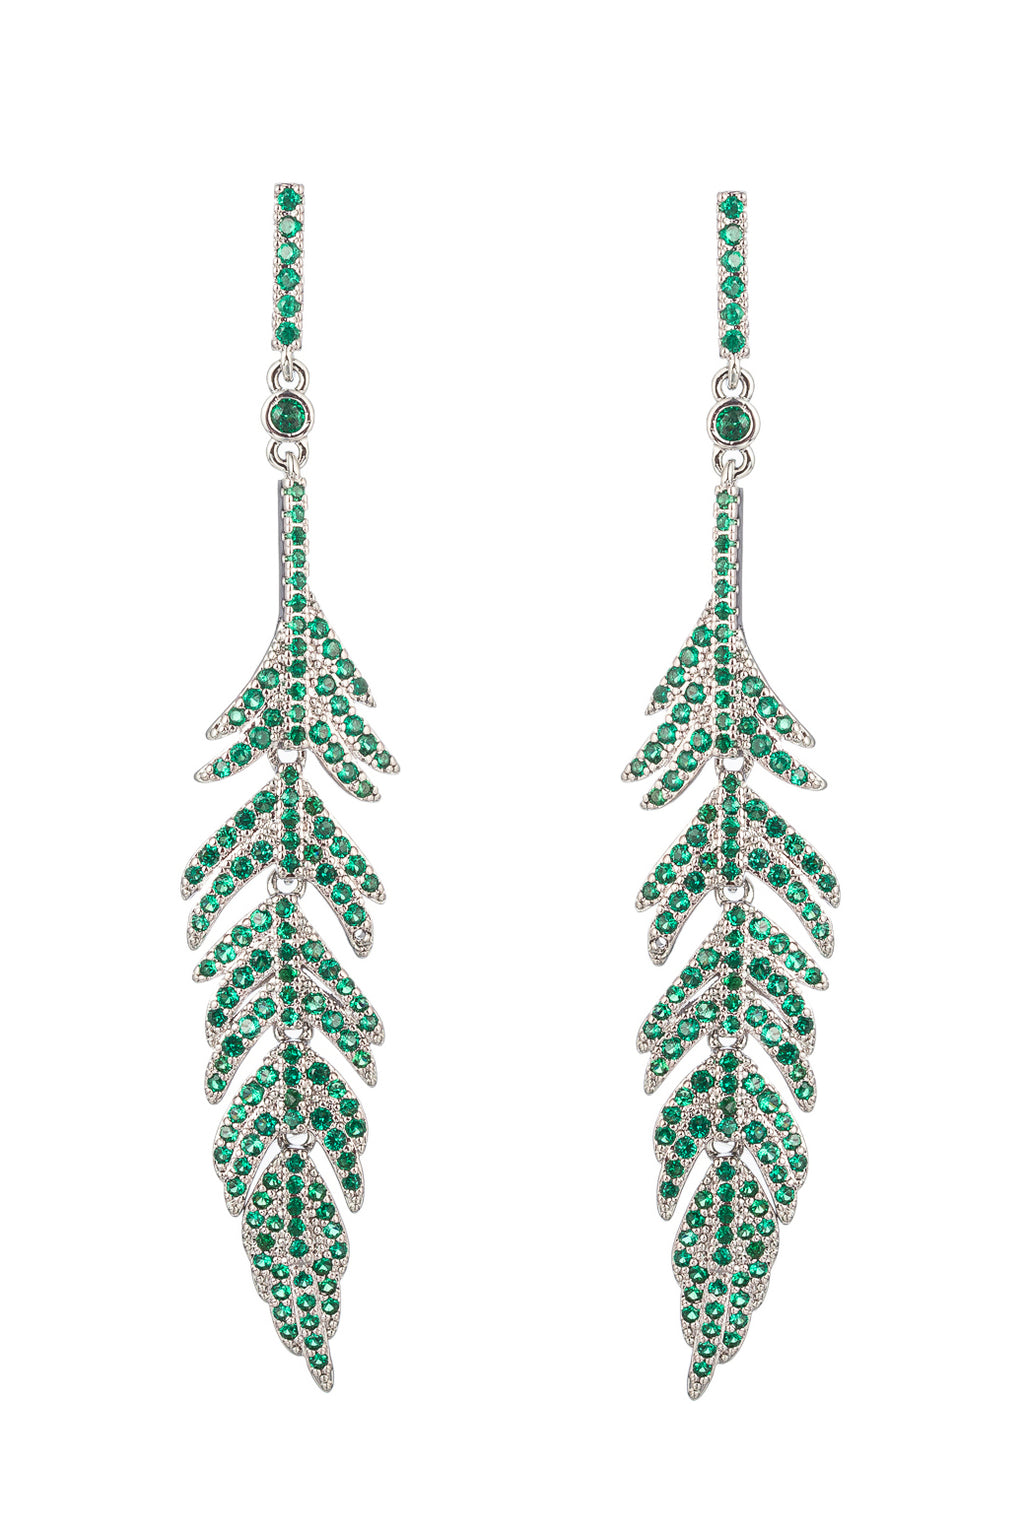 Silver tone brass feather drop earrings studded with green CZ crystals.